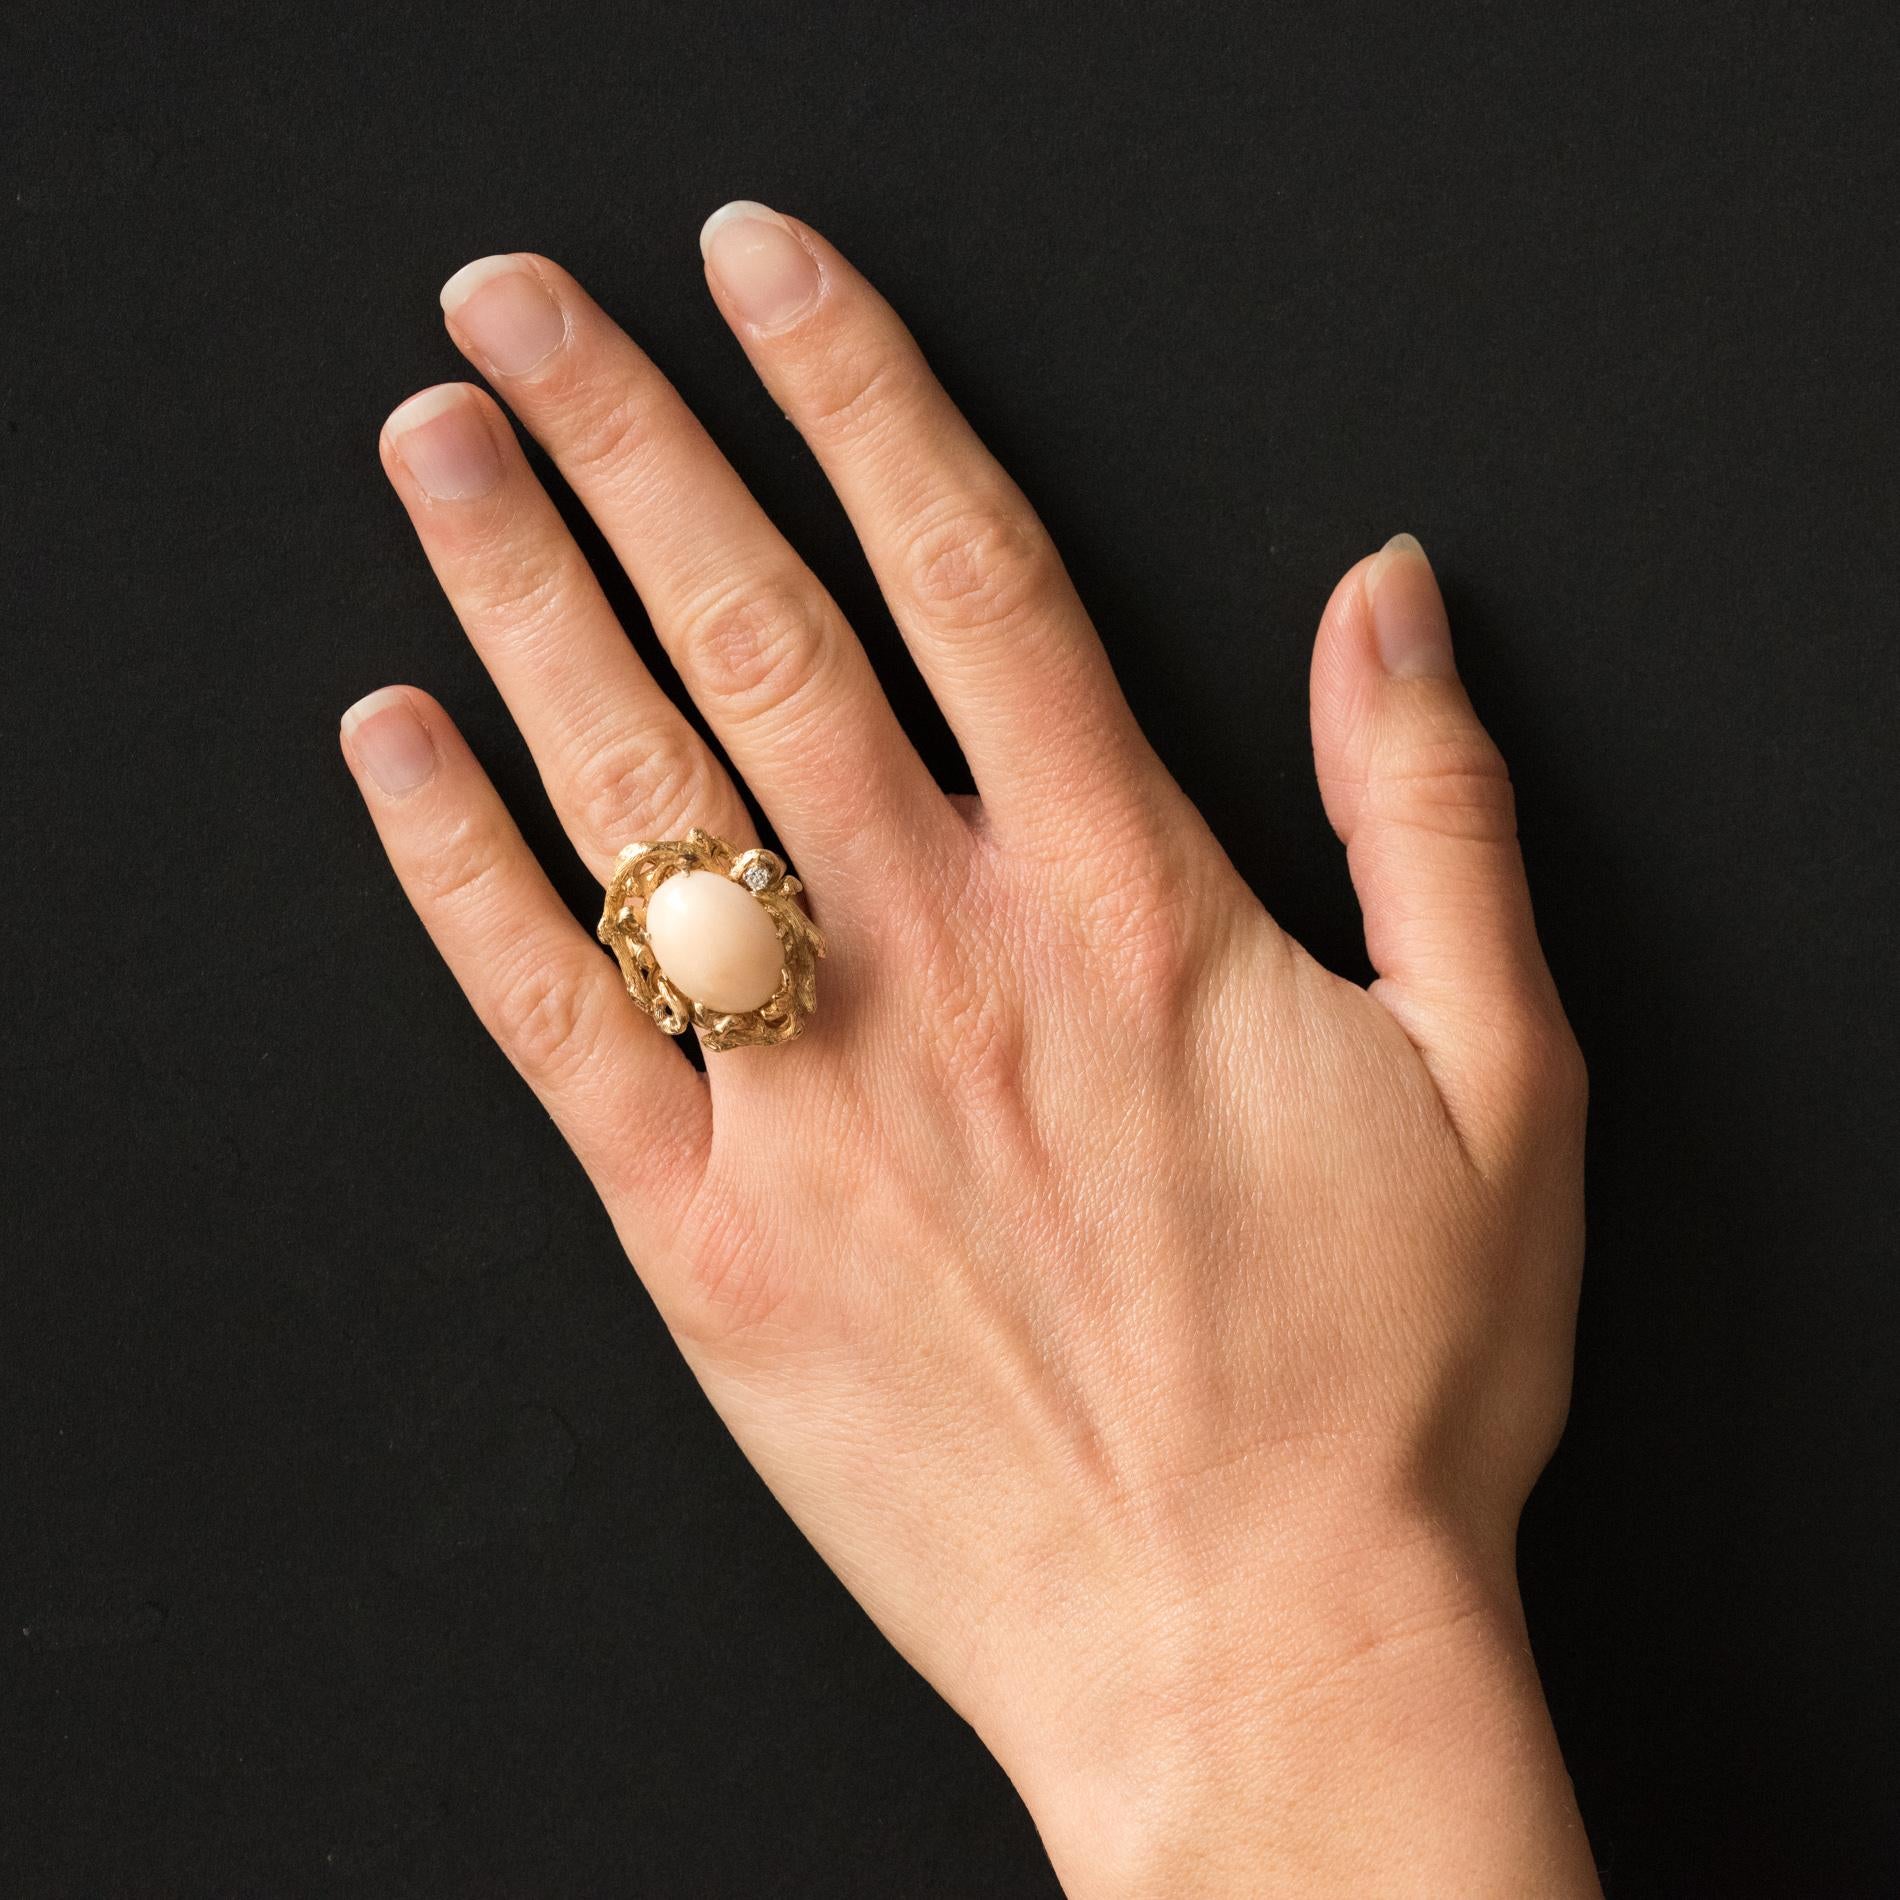 Ring in 14 karat yellow gold.
This beautiful ring with asymmetrical lines is set with claws of an angel skin coral cabochon in a gnarled decor, chiseled like a branch that frames the gem. A brilliant- cut diamond is set with claws on one